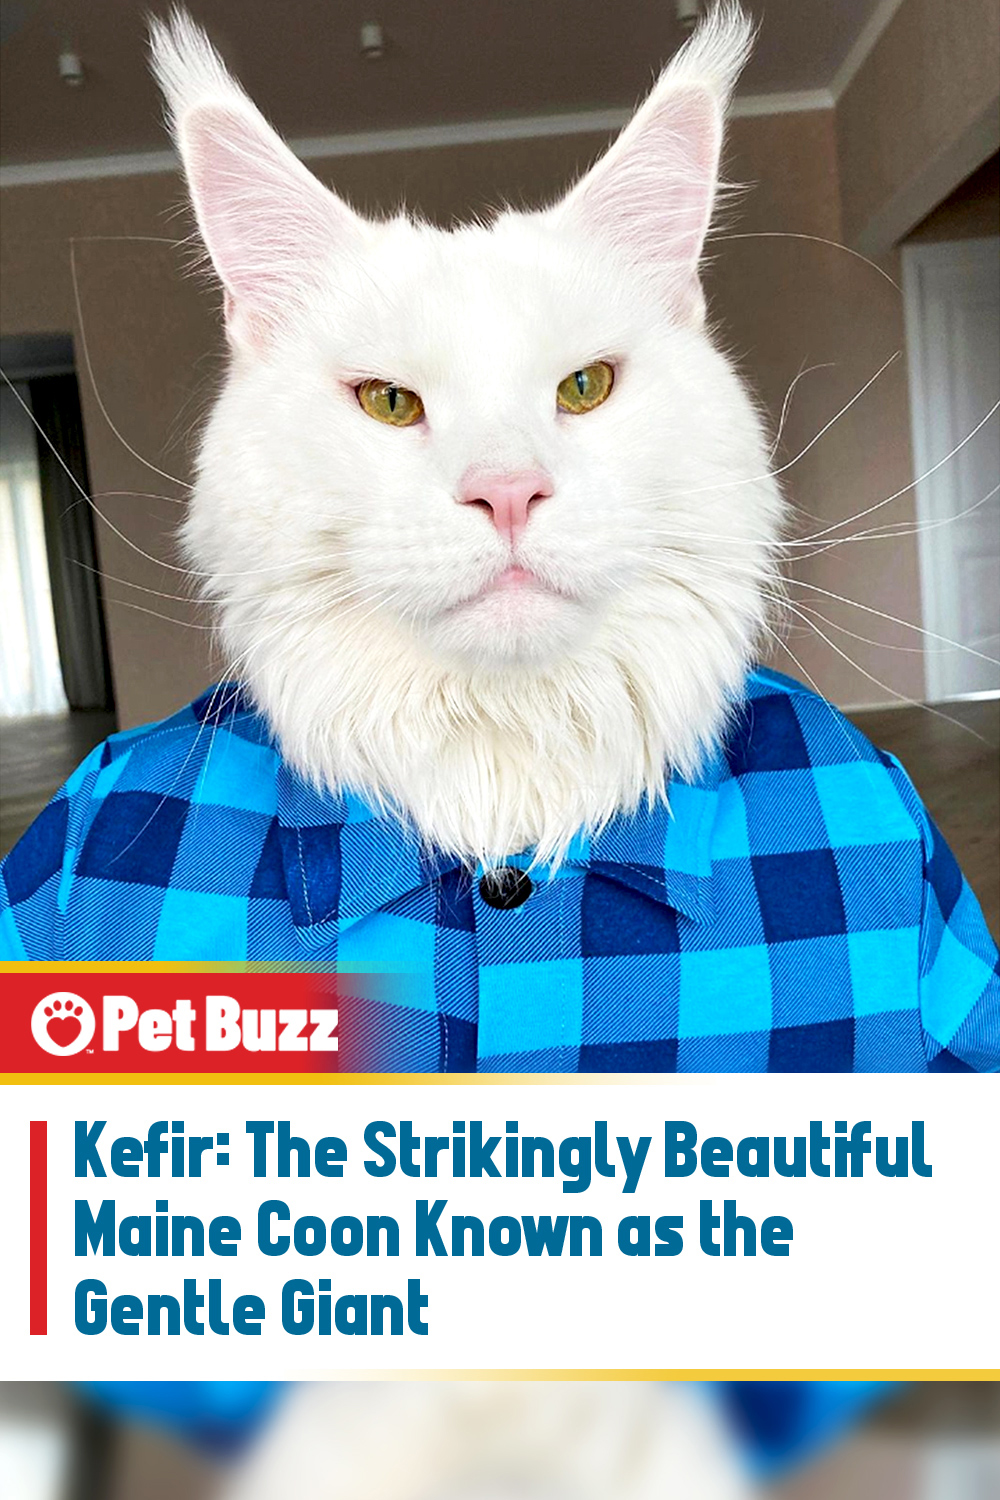 Kefir: The Strikingly Beautiful Maine Coon Known as the Gentle Giant